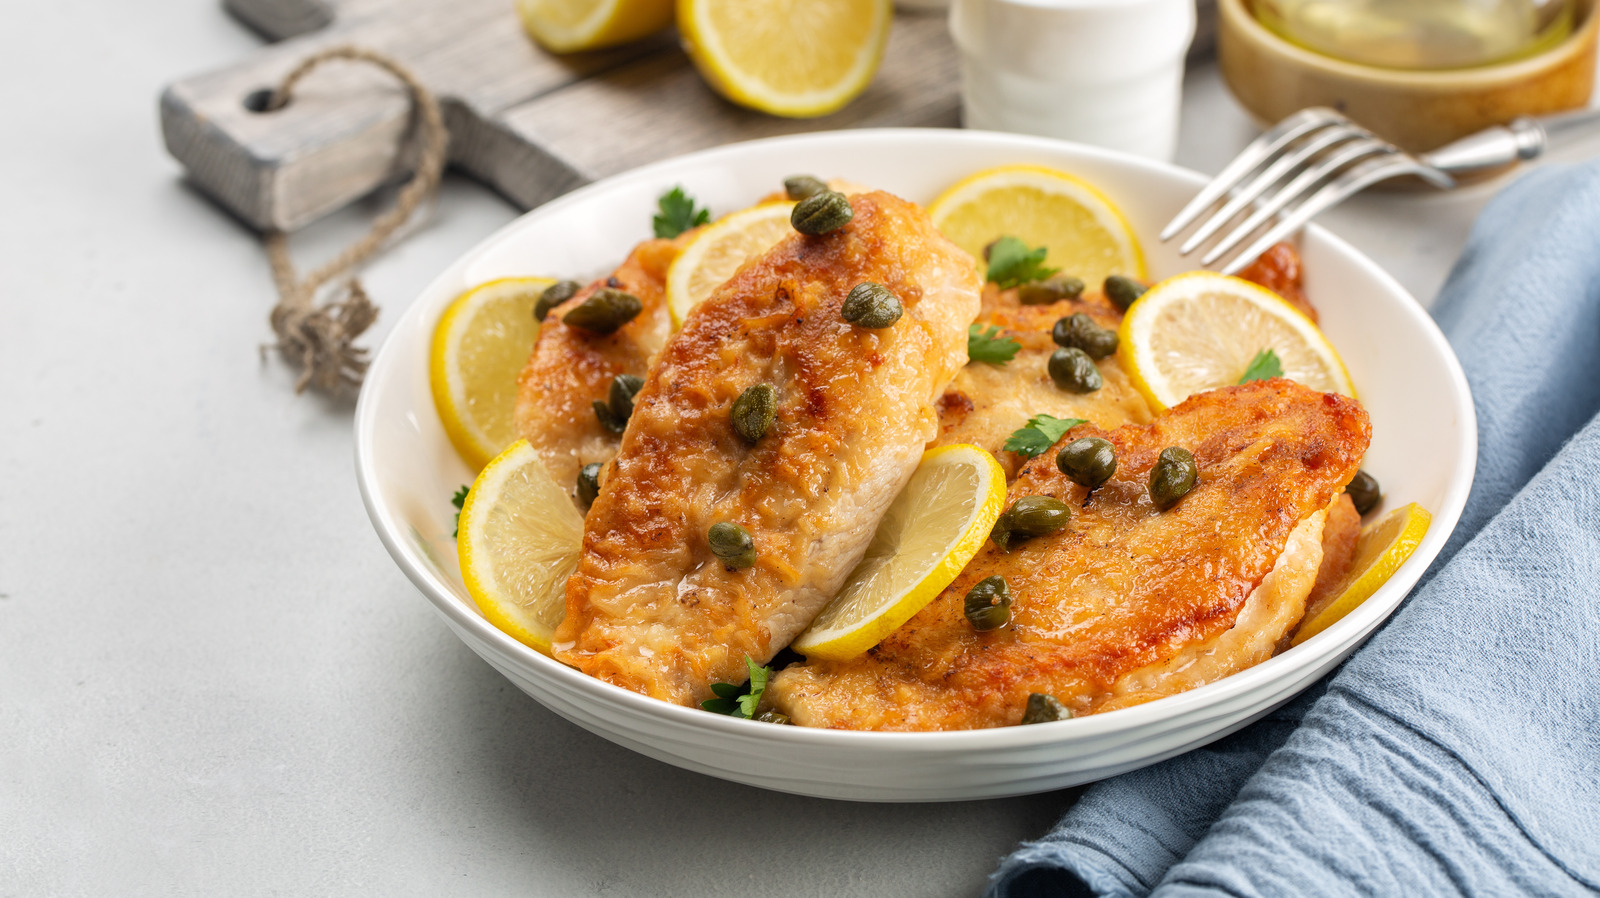 Trader Joe's Fans Are Raving About Its Frozen Chicken Picatta